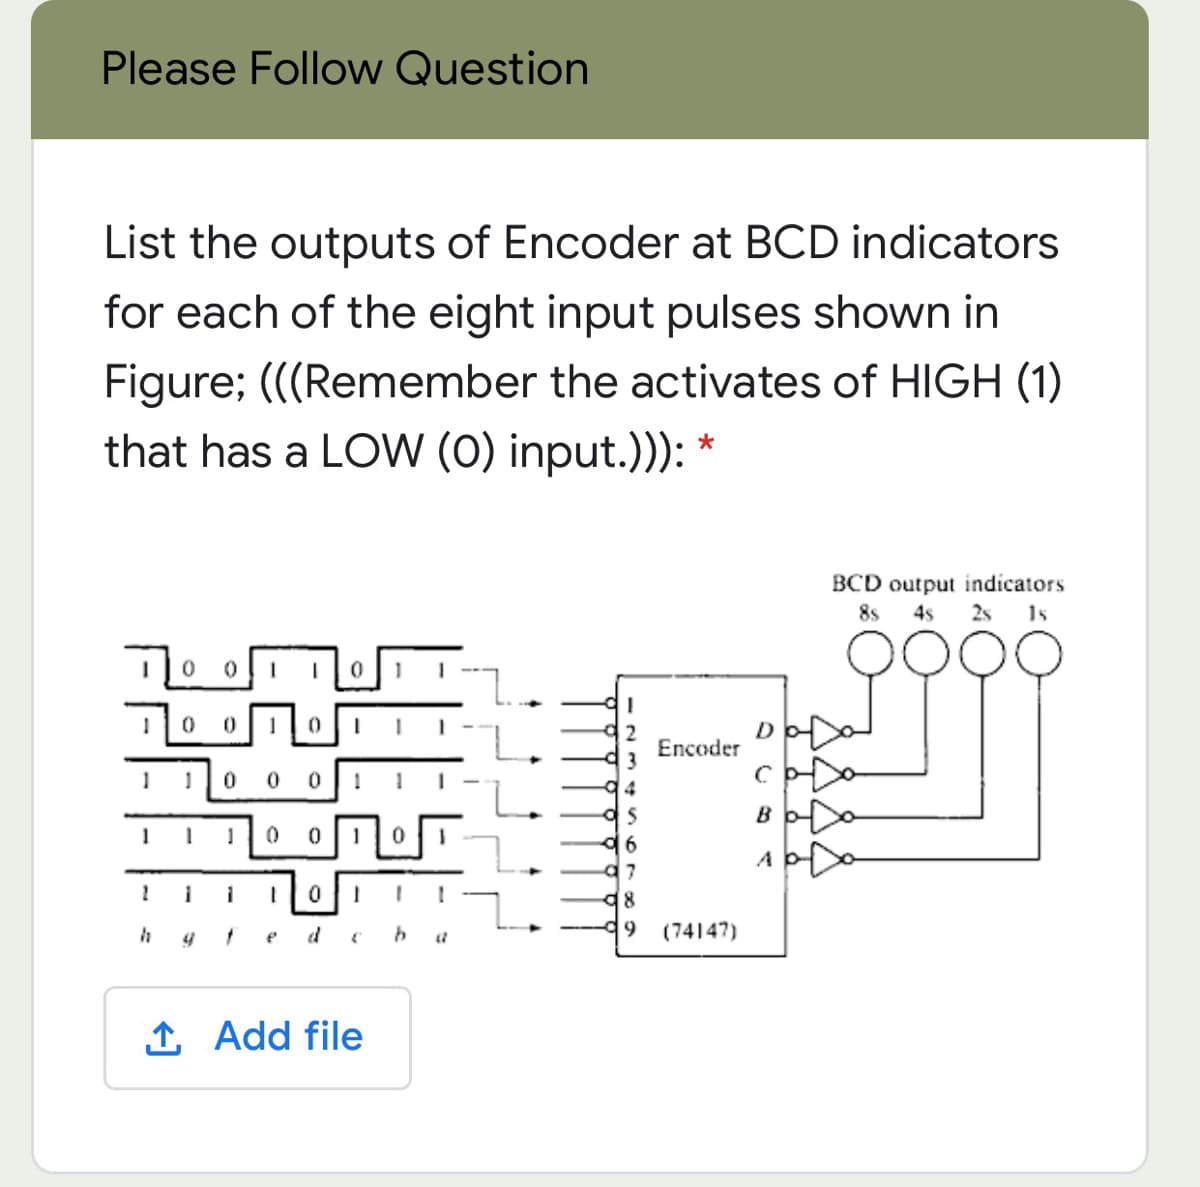 Please Follow Question
List the outputs of Encoder at BCD indicators
for each of the eight input pulses shown in
Figure; (((Remember the activates of HIGH (1)
that has a LOW (0) input.))):
BCD output indicators
8s
4s
2s 1s
D
Encoder
3
B
6.
48
d9
(74147)
1 Add file
